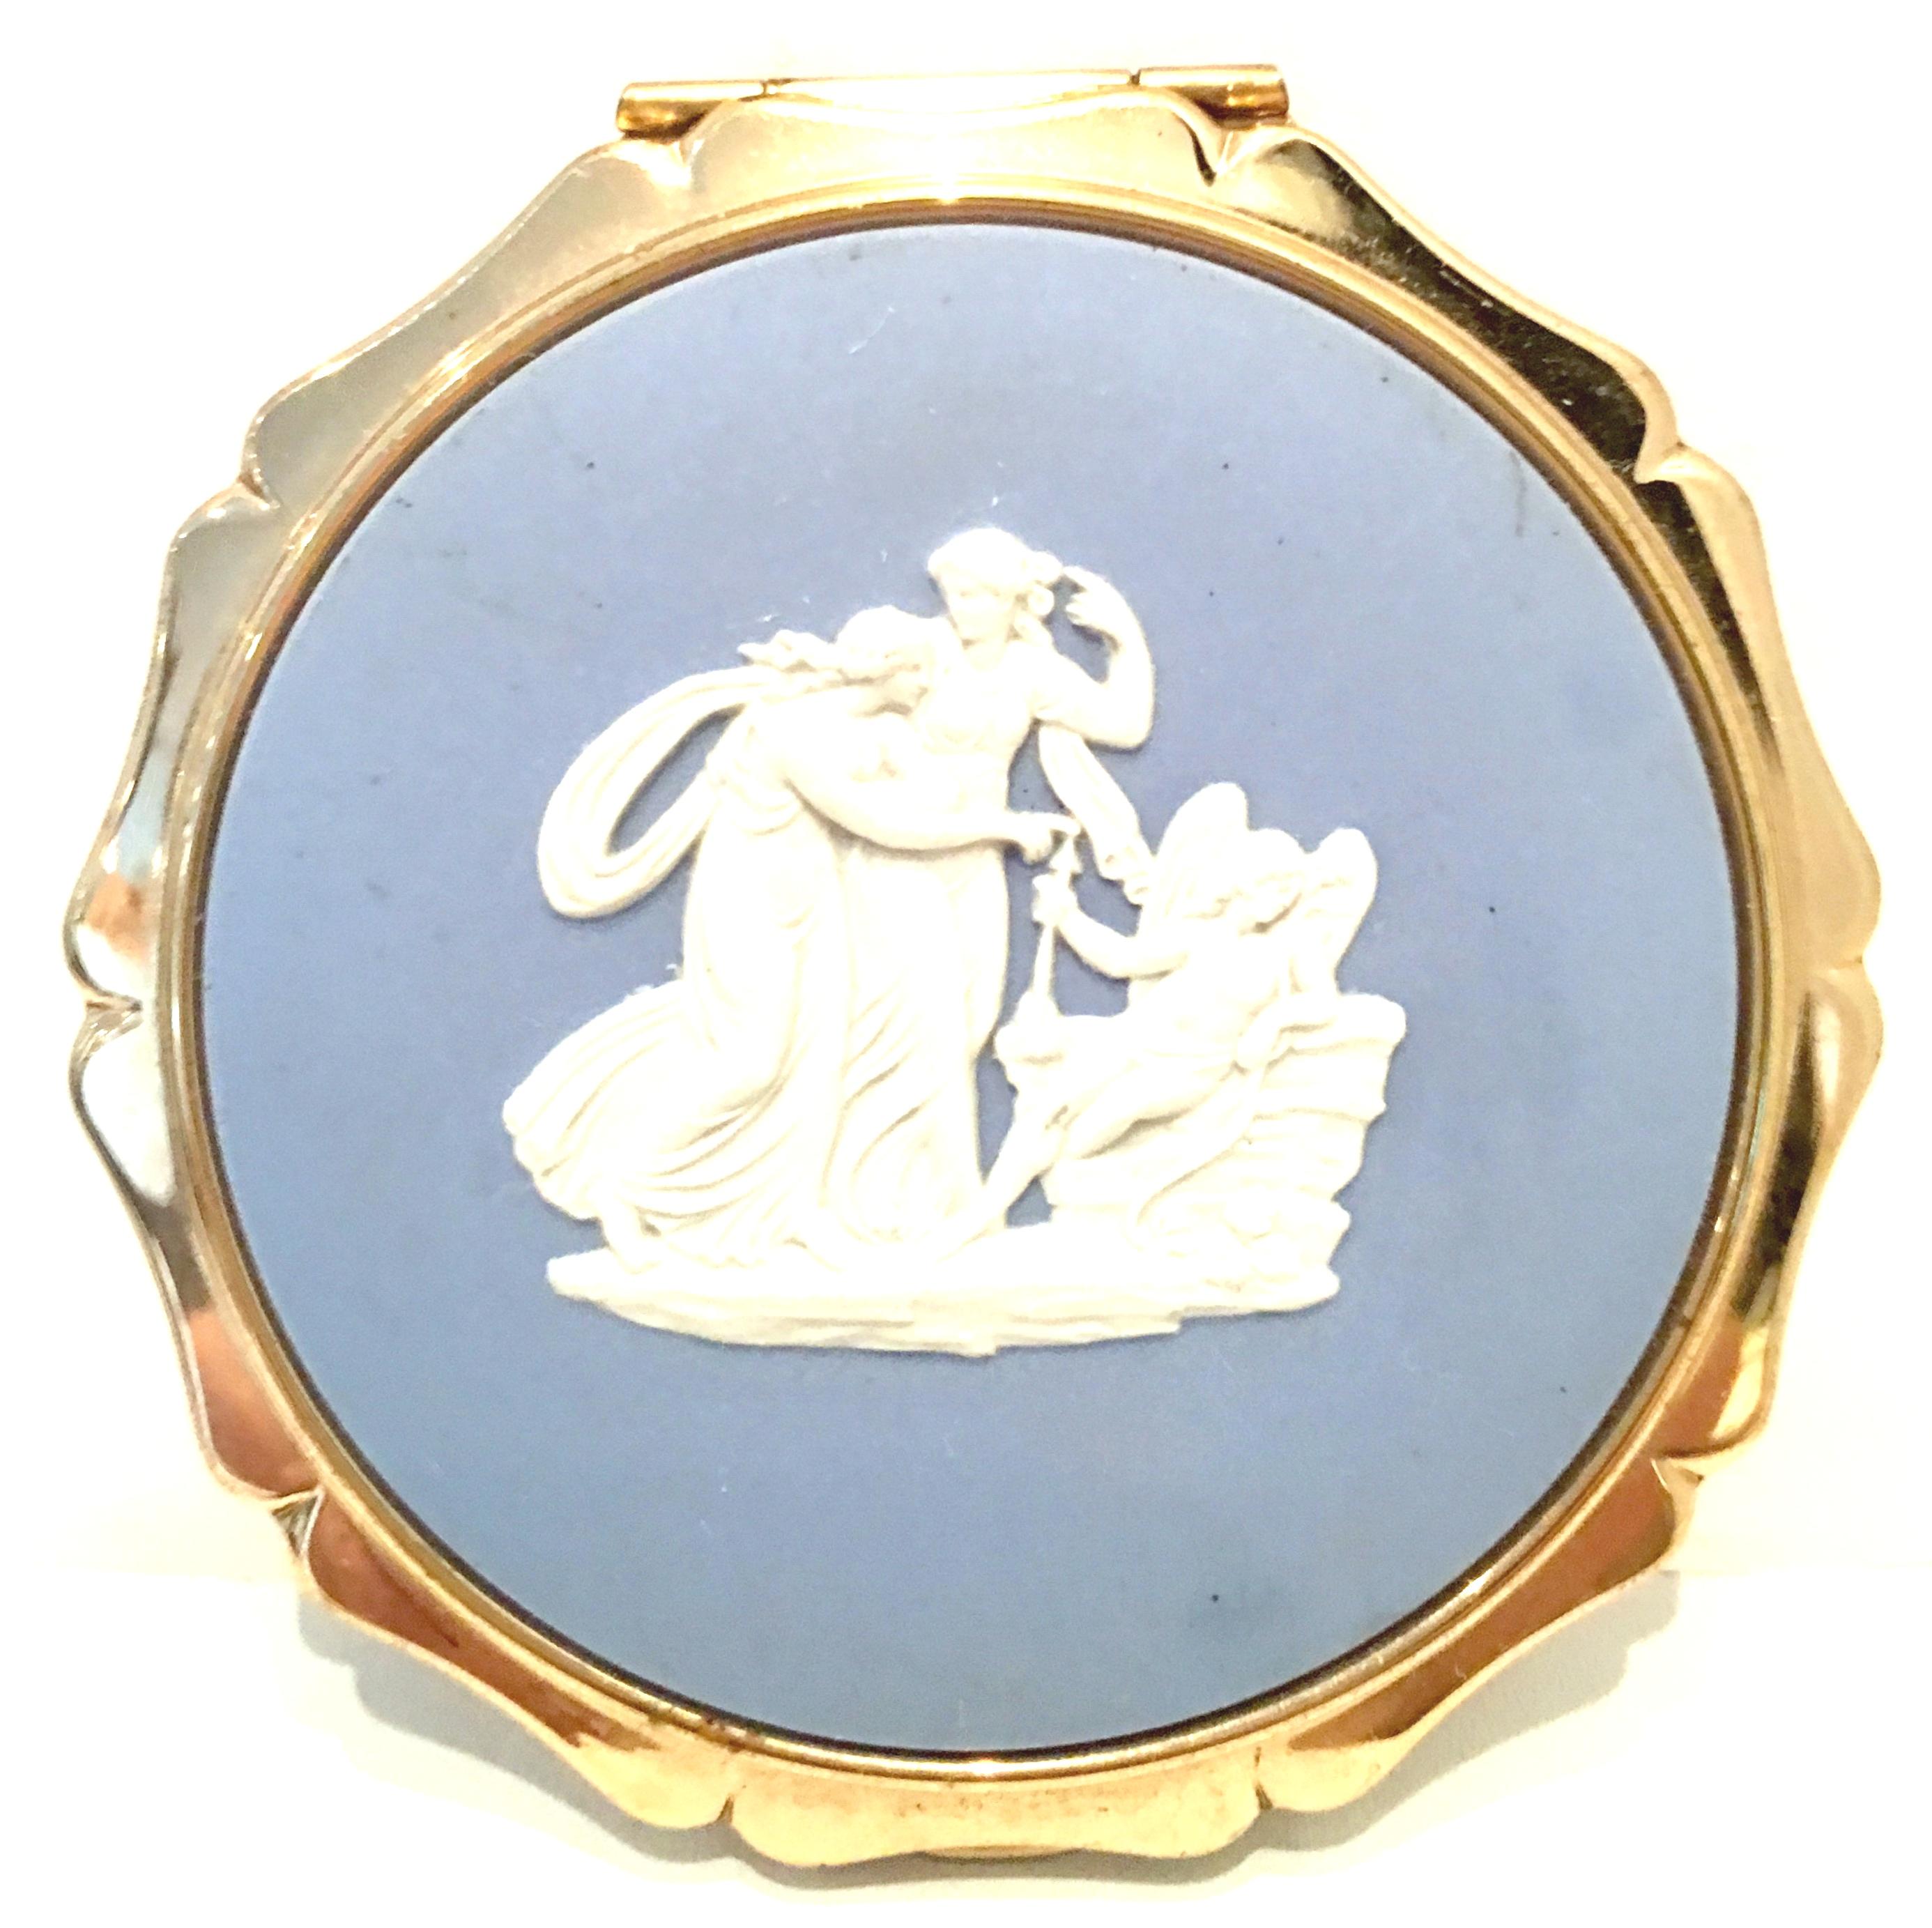 1960,S Wedgwood Jasperware & Gilt Bronze Mirrored Powder Compact by,  Stratton, England
This English blue authentic Jasperware Wedgwood insert with white high relief cherub motif features a gilt gold brass surround and detail. The interior contains